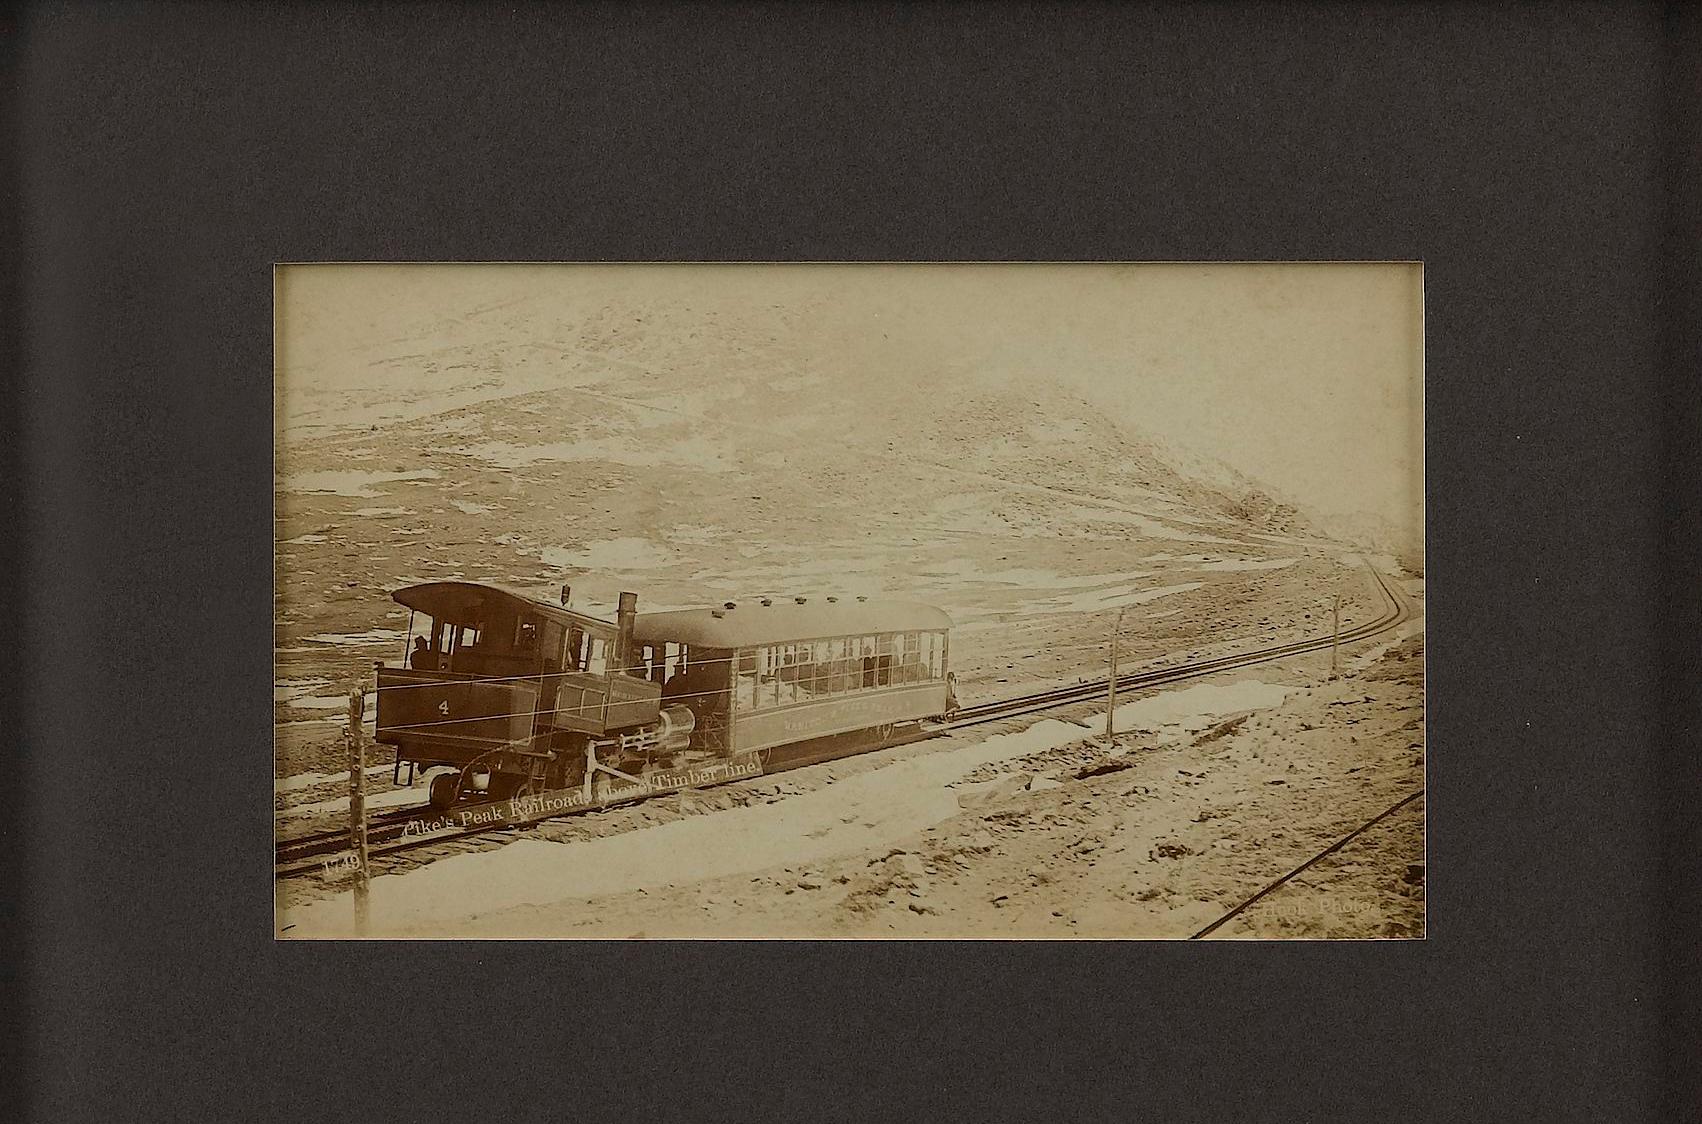 Presented is a collage of three vintage cabinet card photographs of the Manitou and Pikes Peak Railway, in Colorado dating to the 1890s. The sepia toned photographs were published by W.E. Hook View, Stationery and Book Company. The photographs